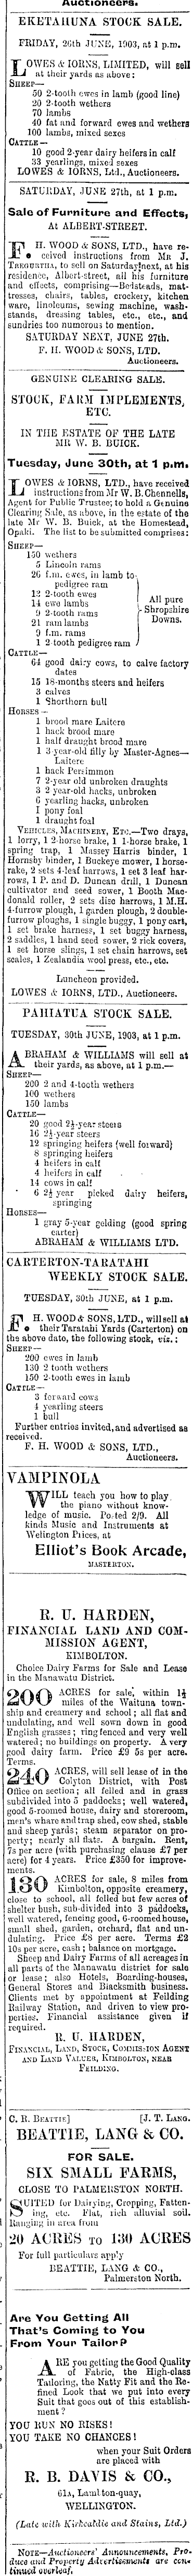 Papers Past Newspapers Wairarapa Daily Times 25 June 1903 Page 3 Advertisements Column 7